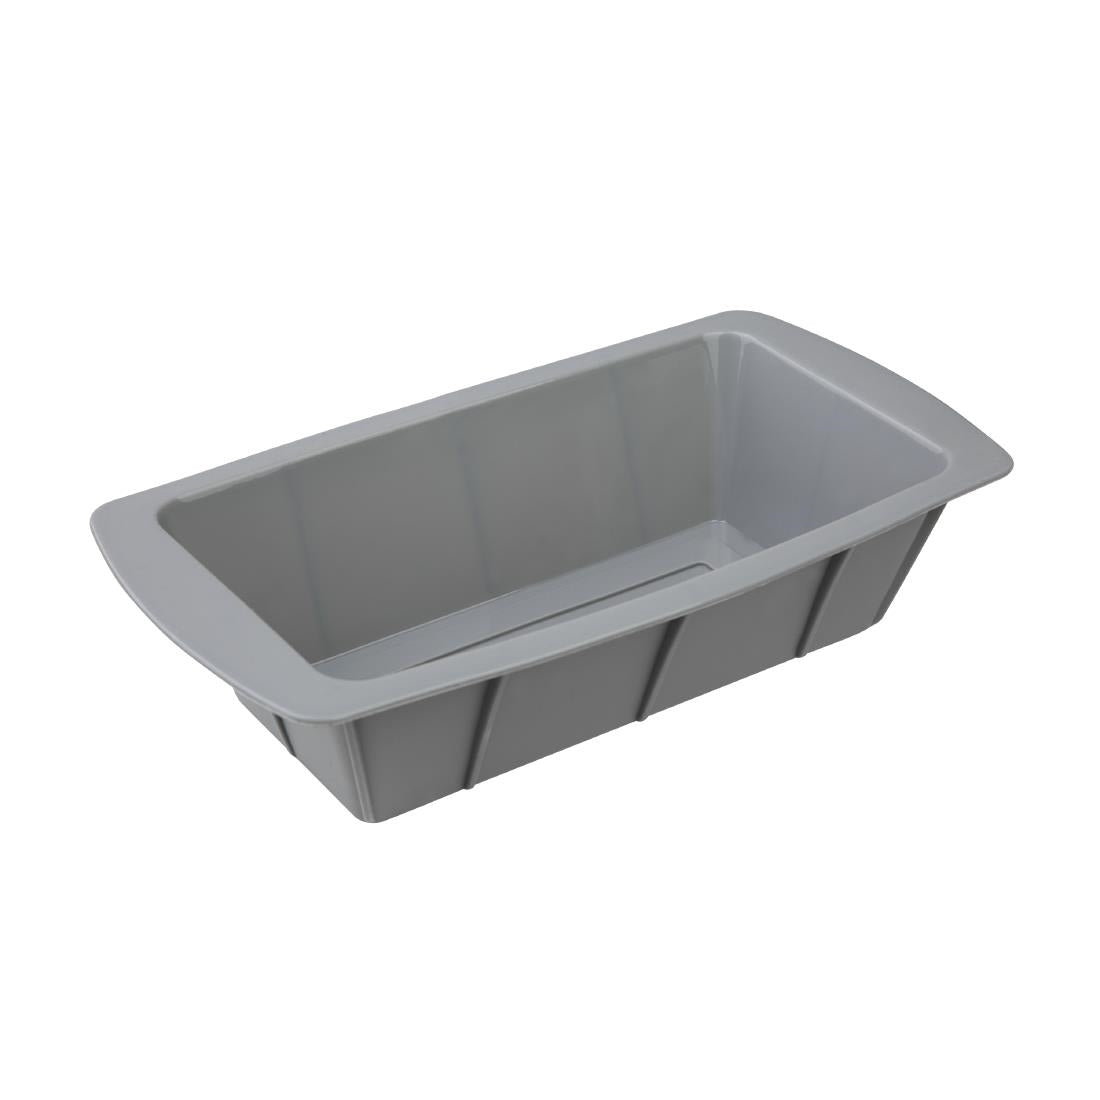 DA525 Vogue 1.5lb Flexible Silicone Loaf Pan JD Catering Equipment Solutions Ltd